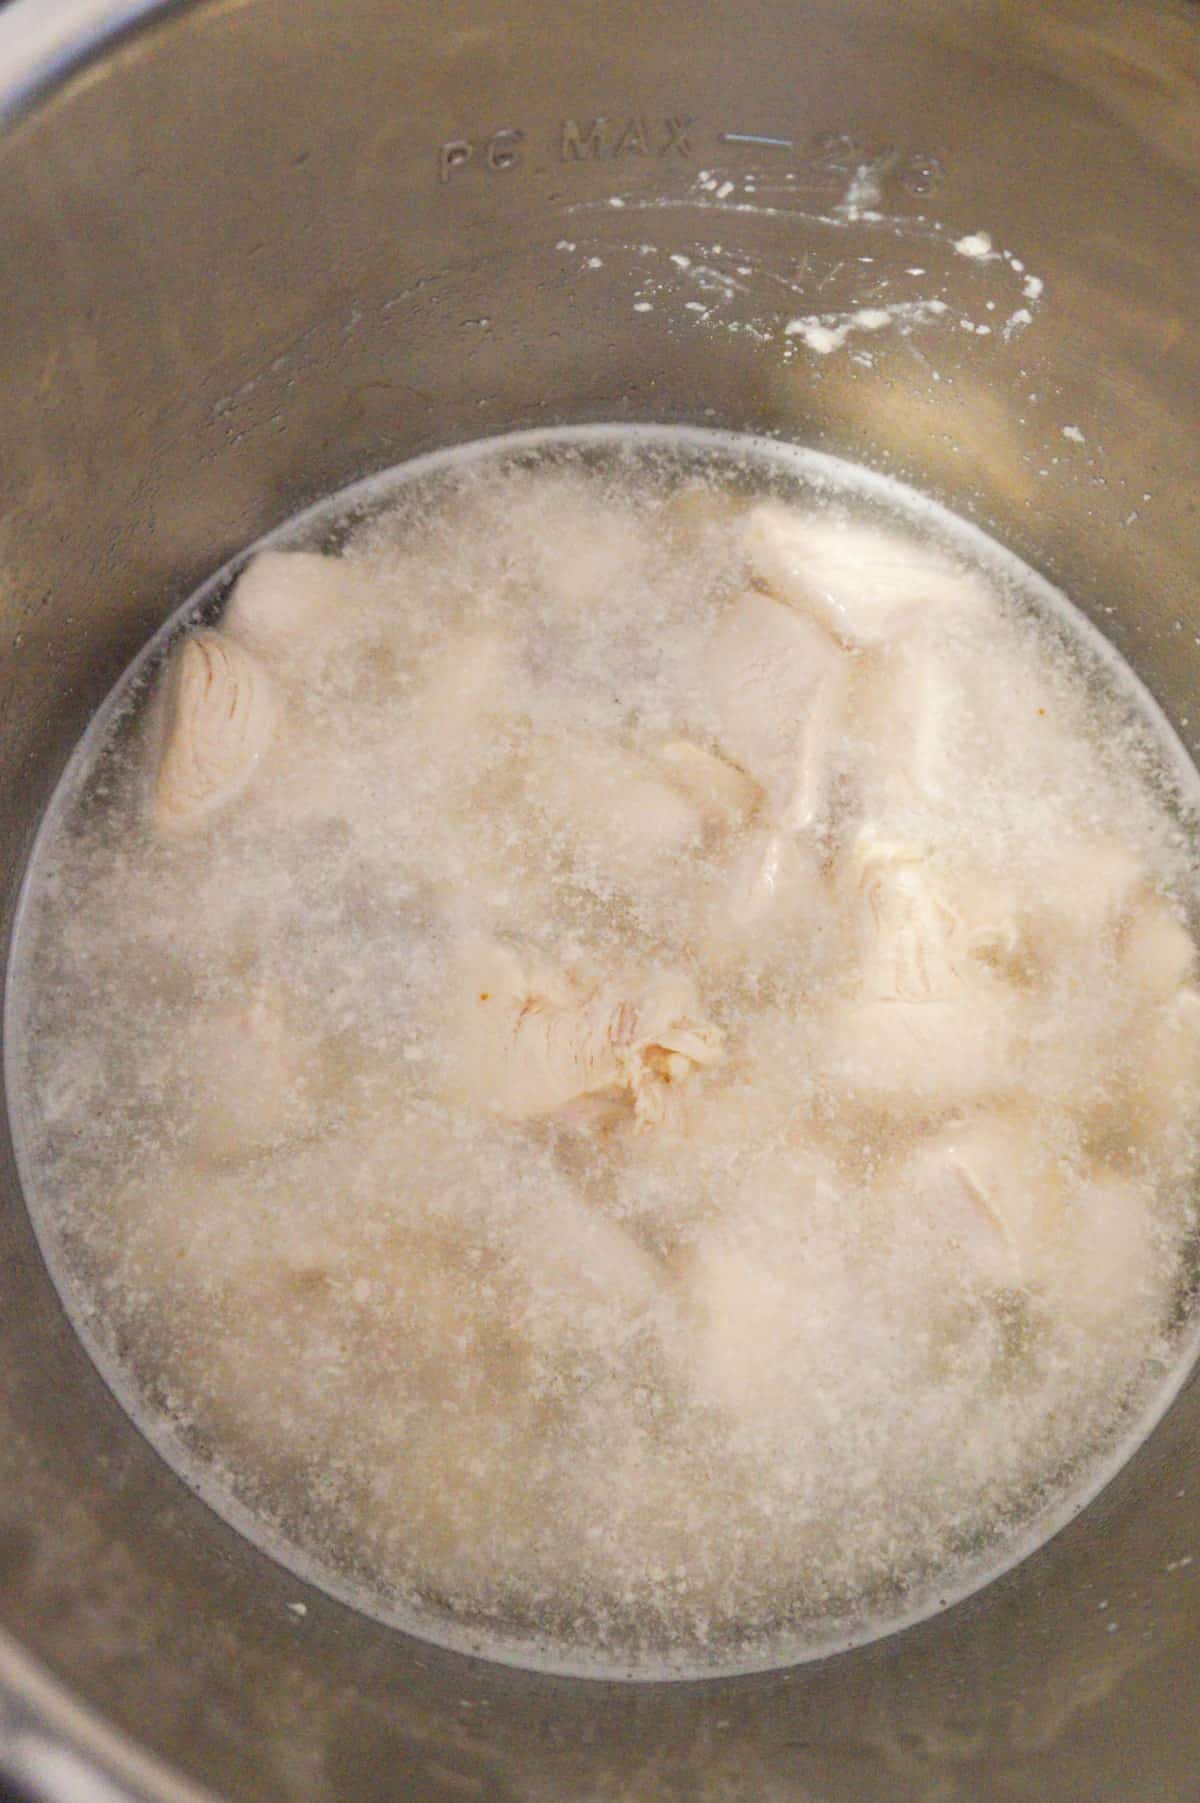 water and chicken breast chunks in an Instant Pot